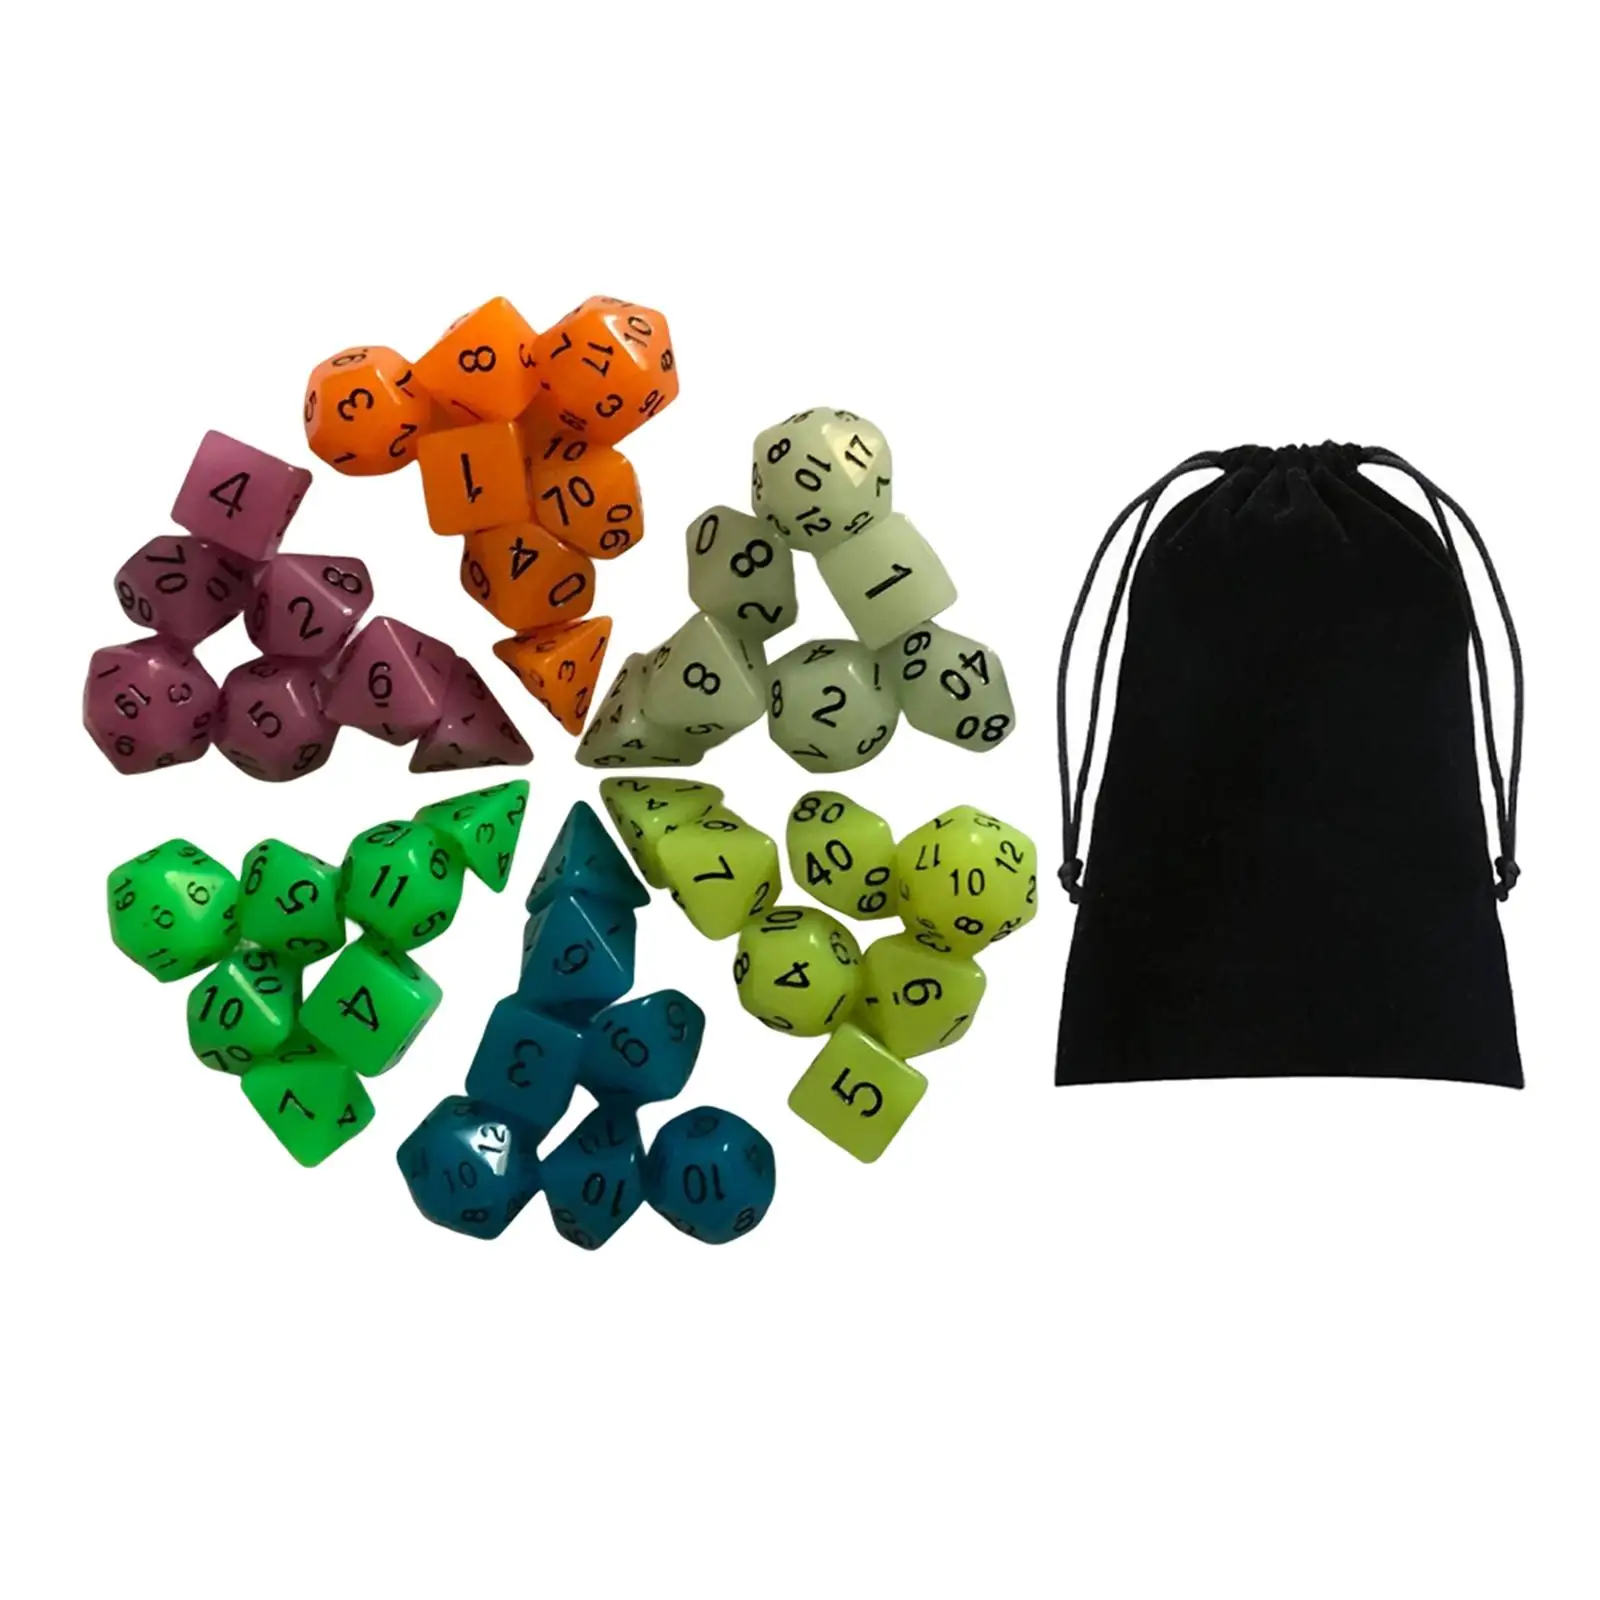 Acrylic Luminous RPG Set D4-D20 Bar Toys Glowing Polyhedral Dices Set for DND Role Playing RPG Board Game Math Teaching